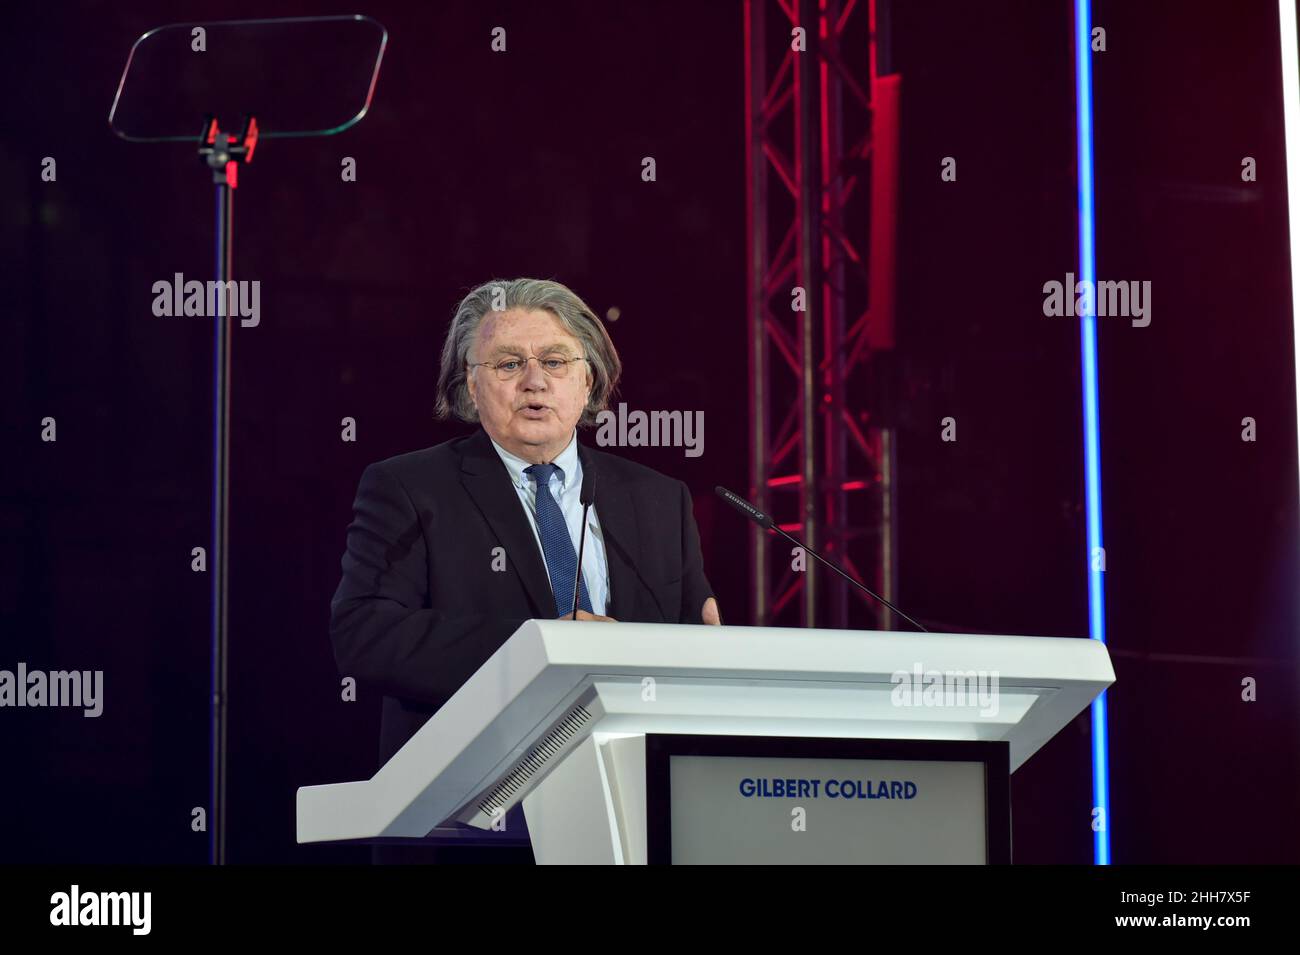 Gilbert Collard, a former member of the Rassemblement National, seen delivering his speech in support of Eric Zemmour at the opening of the meeting after announcing his departure from the RN party of Marine Le Pen.Eric Zemmour held an election campaign meeting at the Palais des Libertes in Cannes, during which he presented the new figures of the right who have joined his party called 'reconquete! He insisted in his will to make the union of the right, the only way he says to win the elections and promises that new members of other right-wing parties will join his political movement. (Photo by Stock Photo